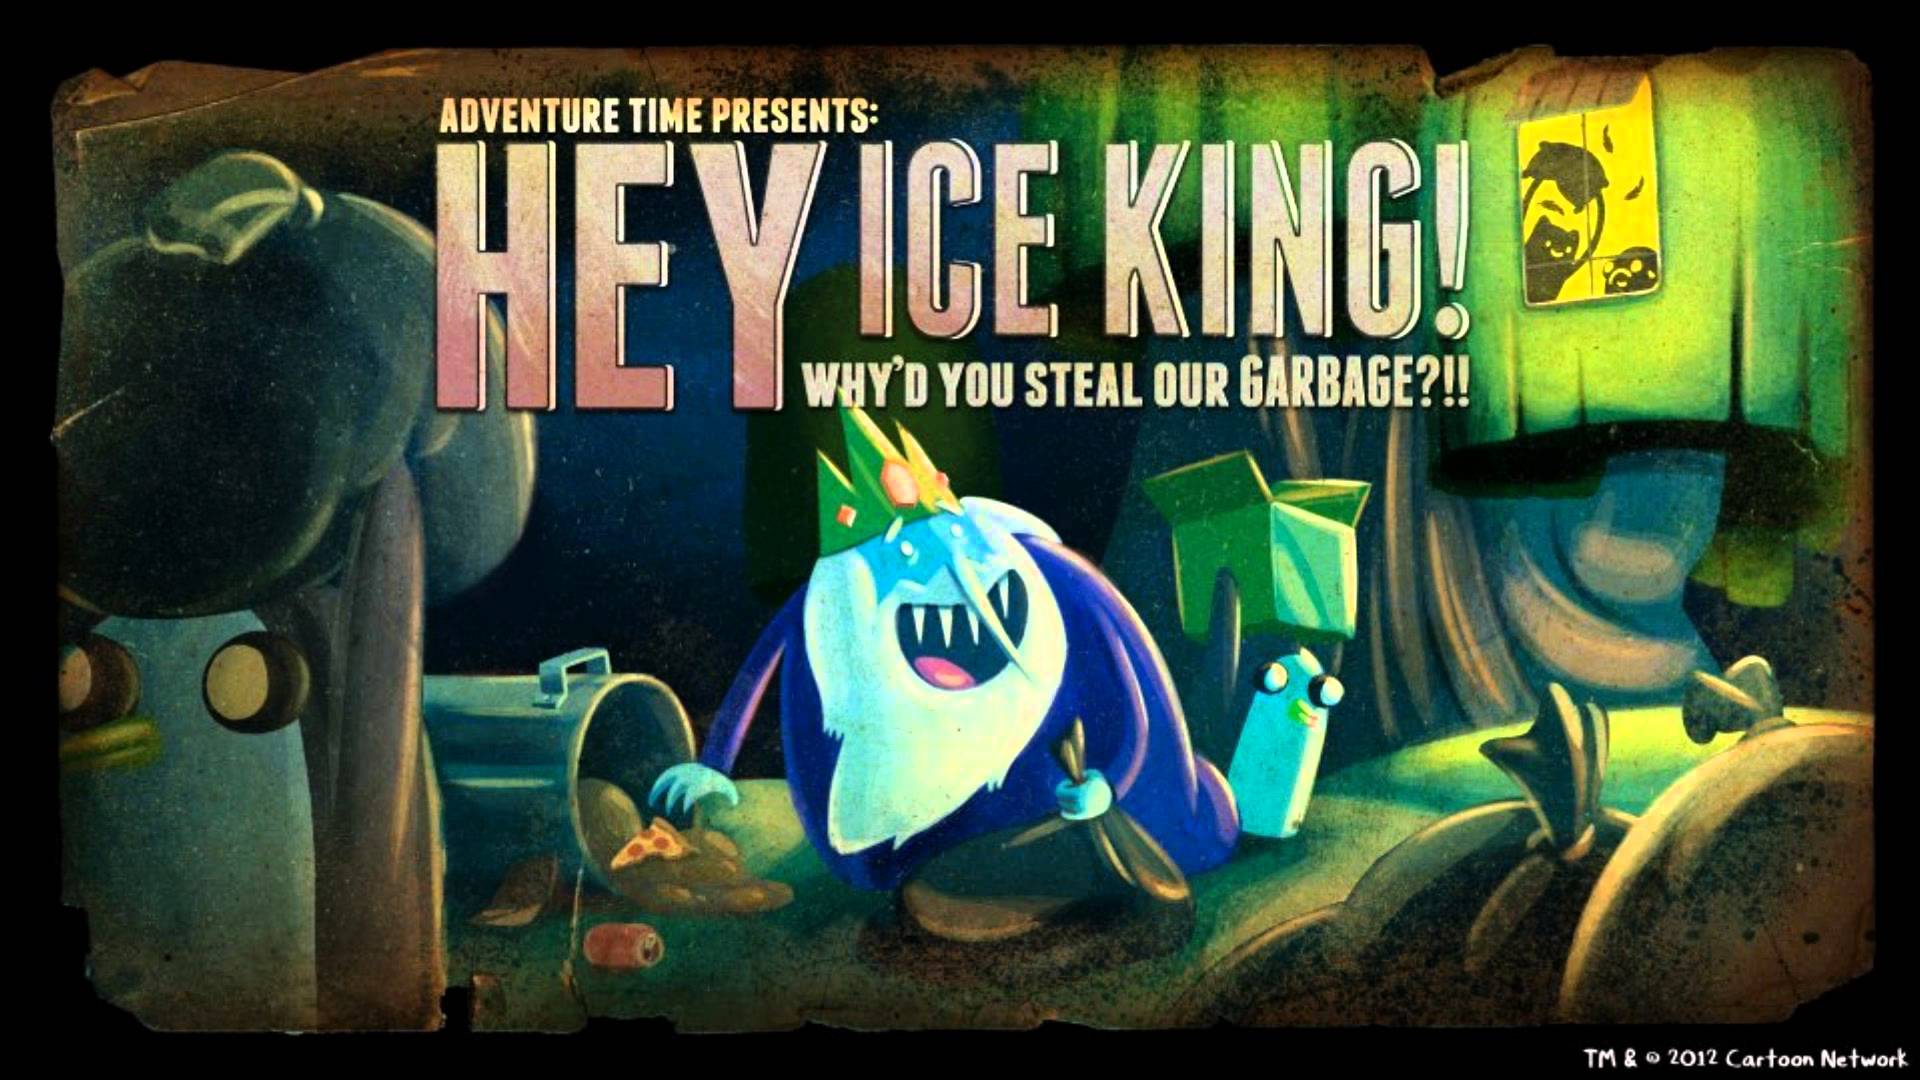 Adventure Time: Hey Ice King! Why'd You Steal Our Garbage?!!